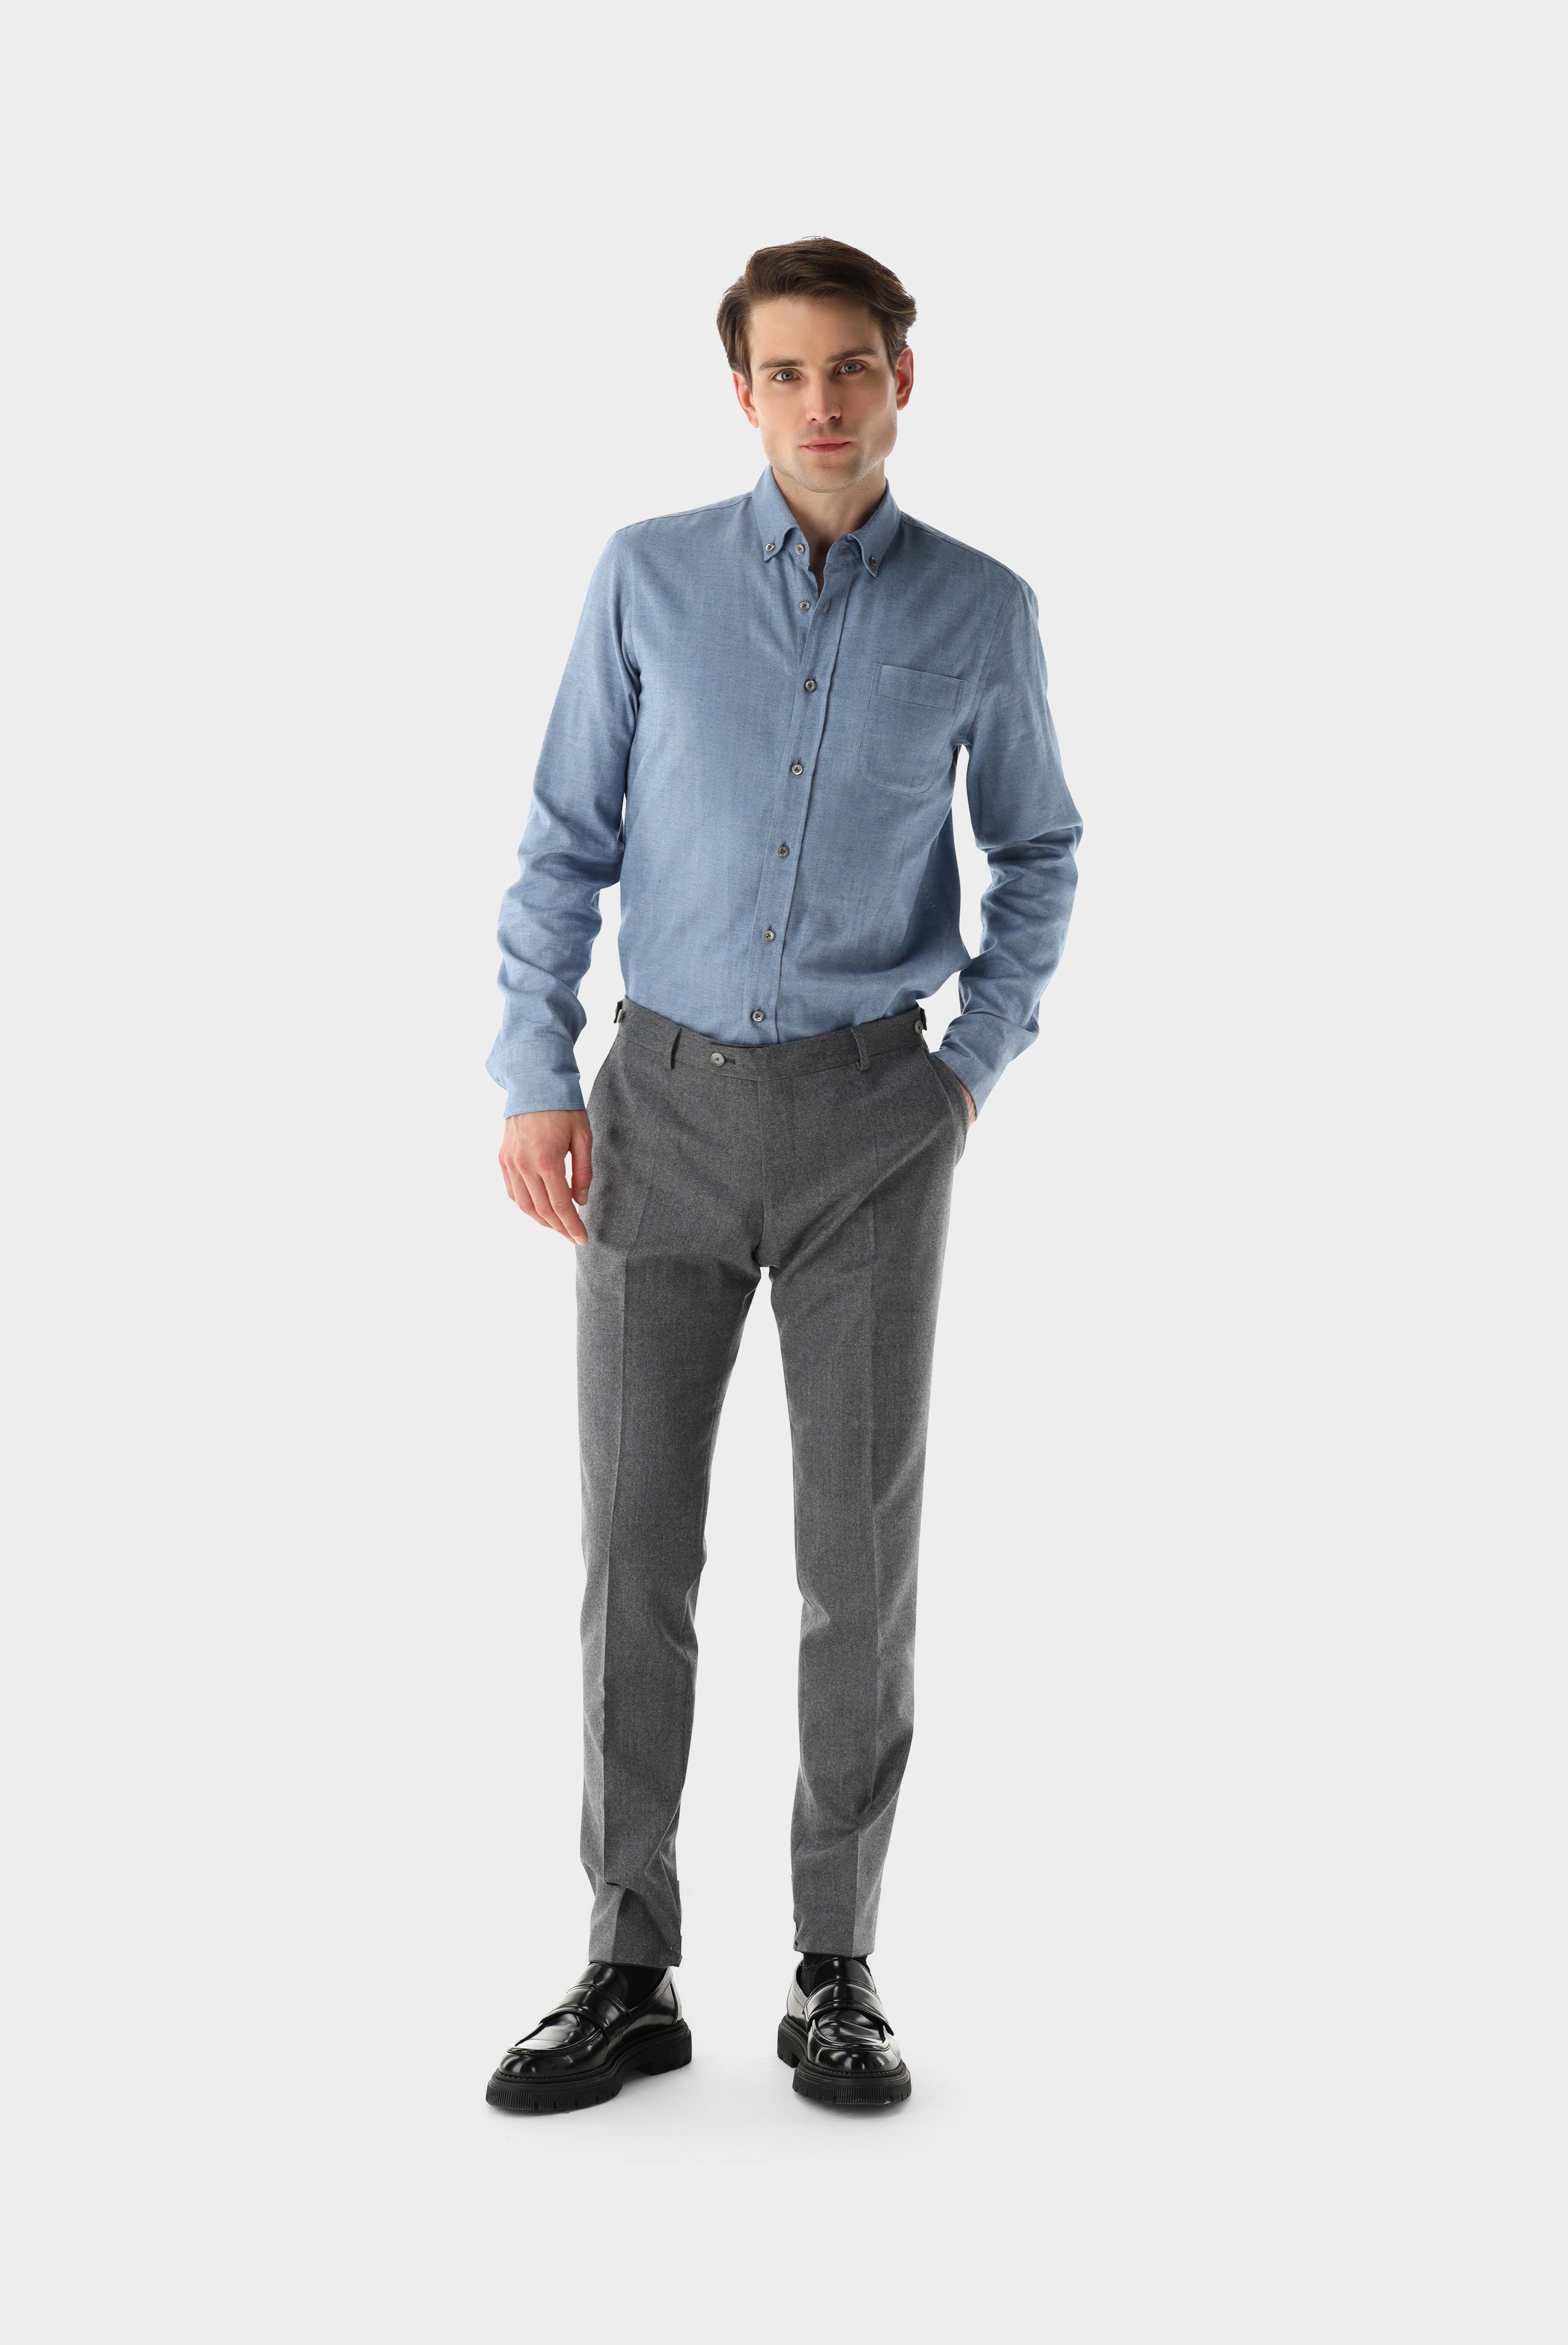 Casual Hemden+Button-Down Flanellhemd Tailor Fit+20.2013.9V.155045.770.40